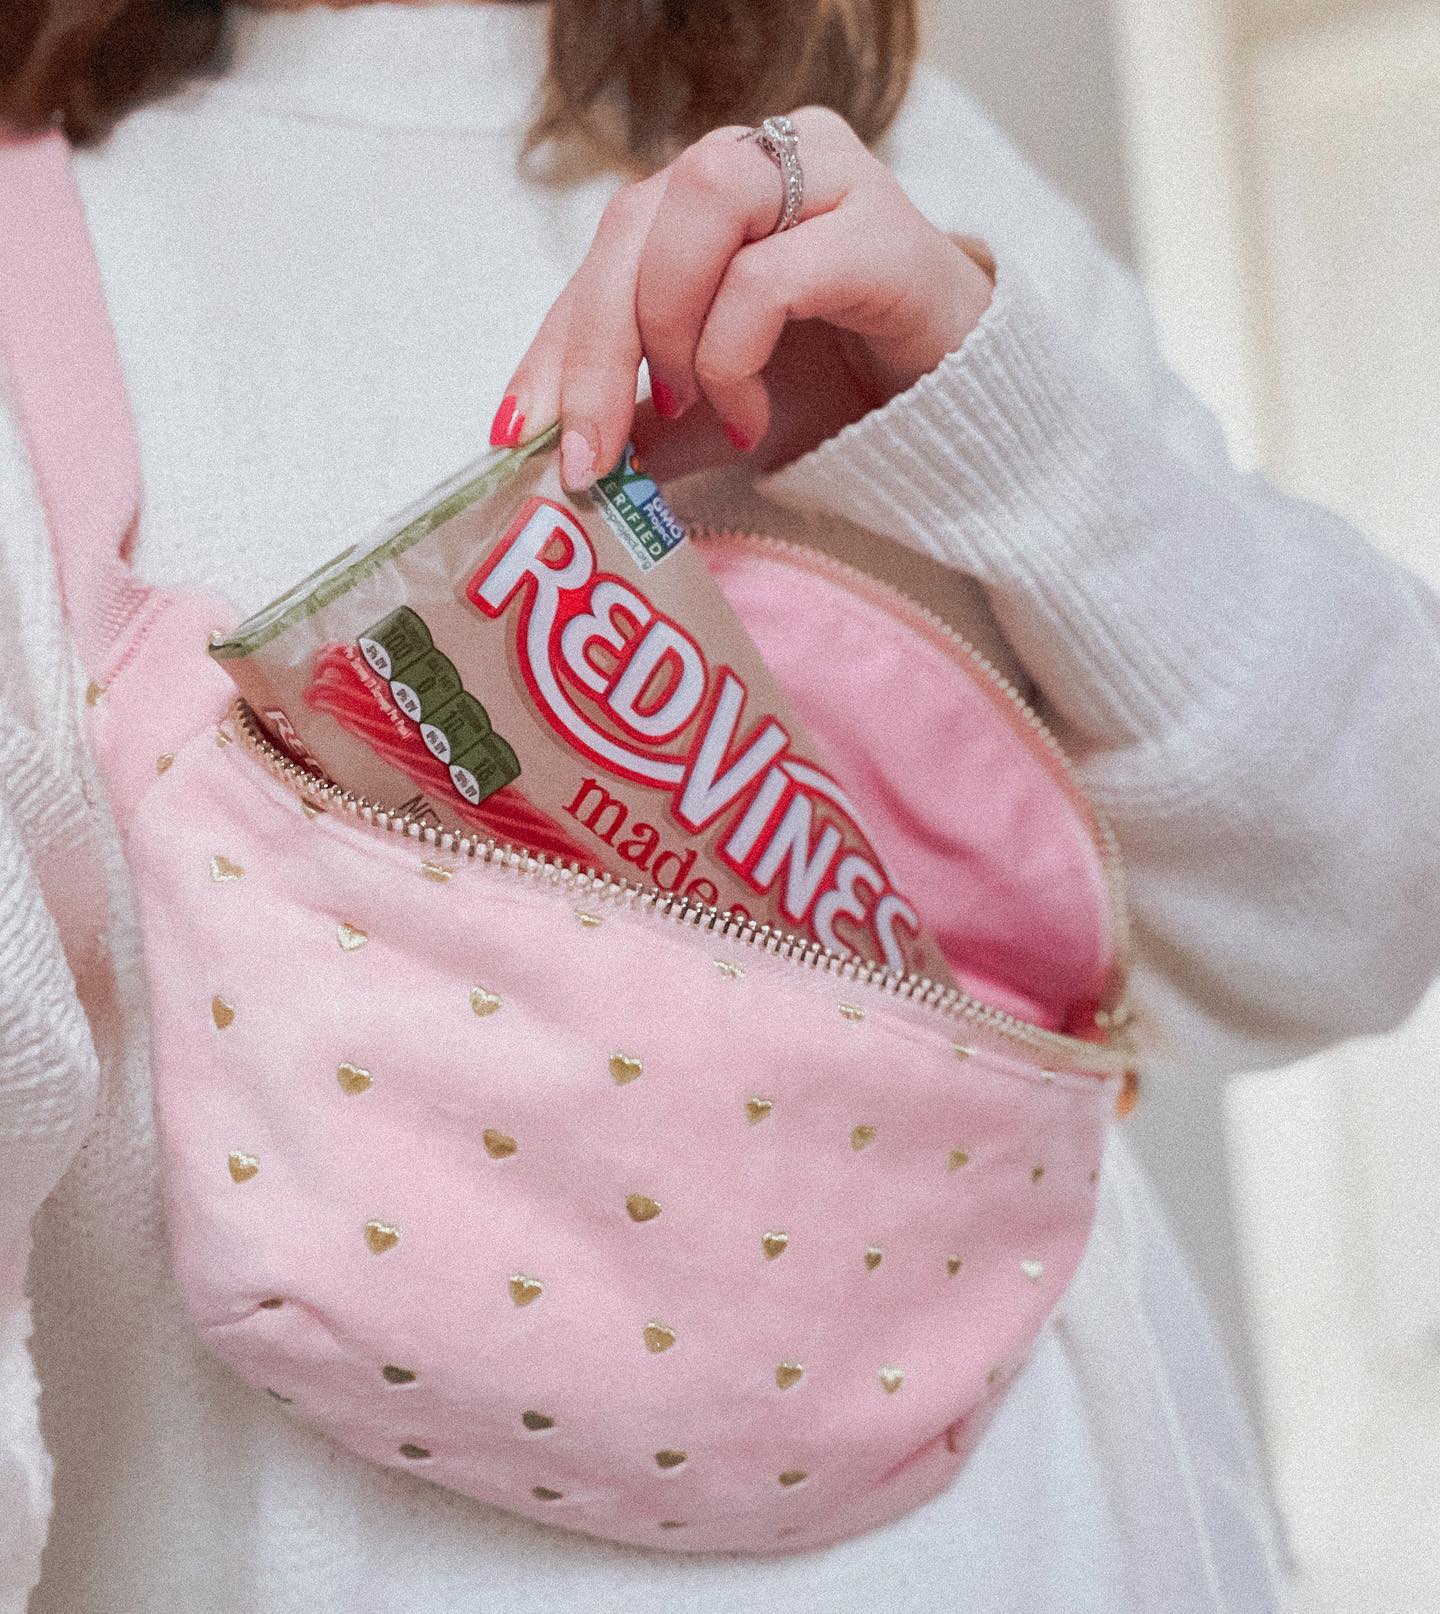 Pulling a Red Vines Made Simple Berry Licorice Twists Tray out of a shoulder bag